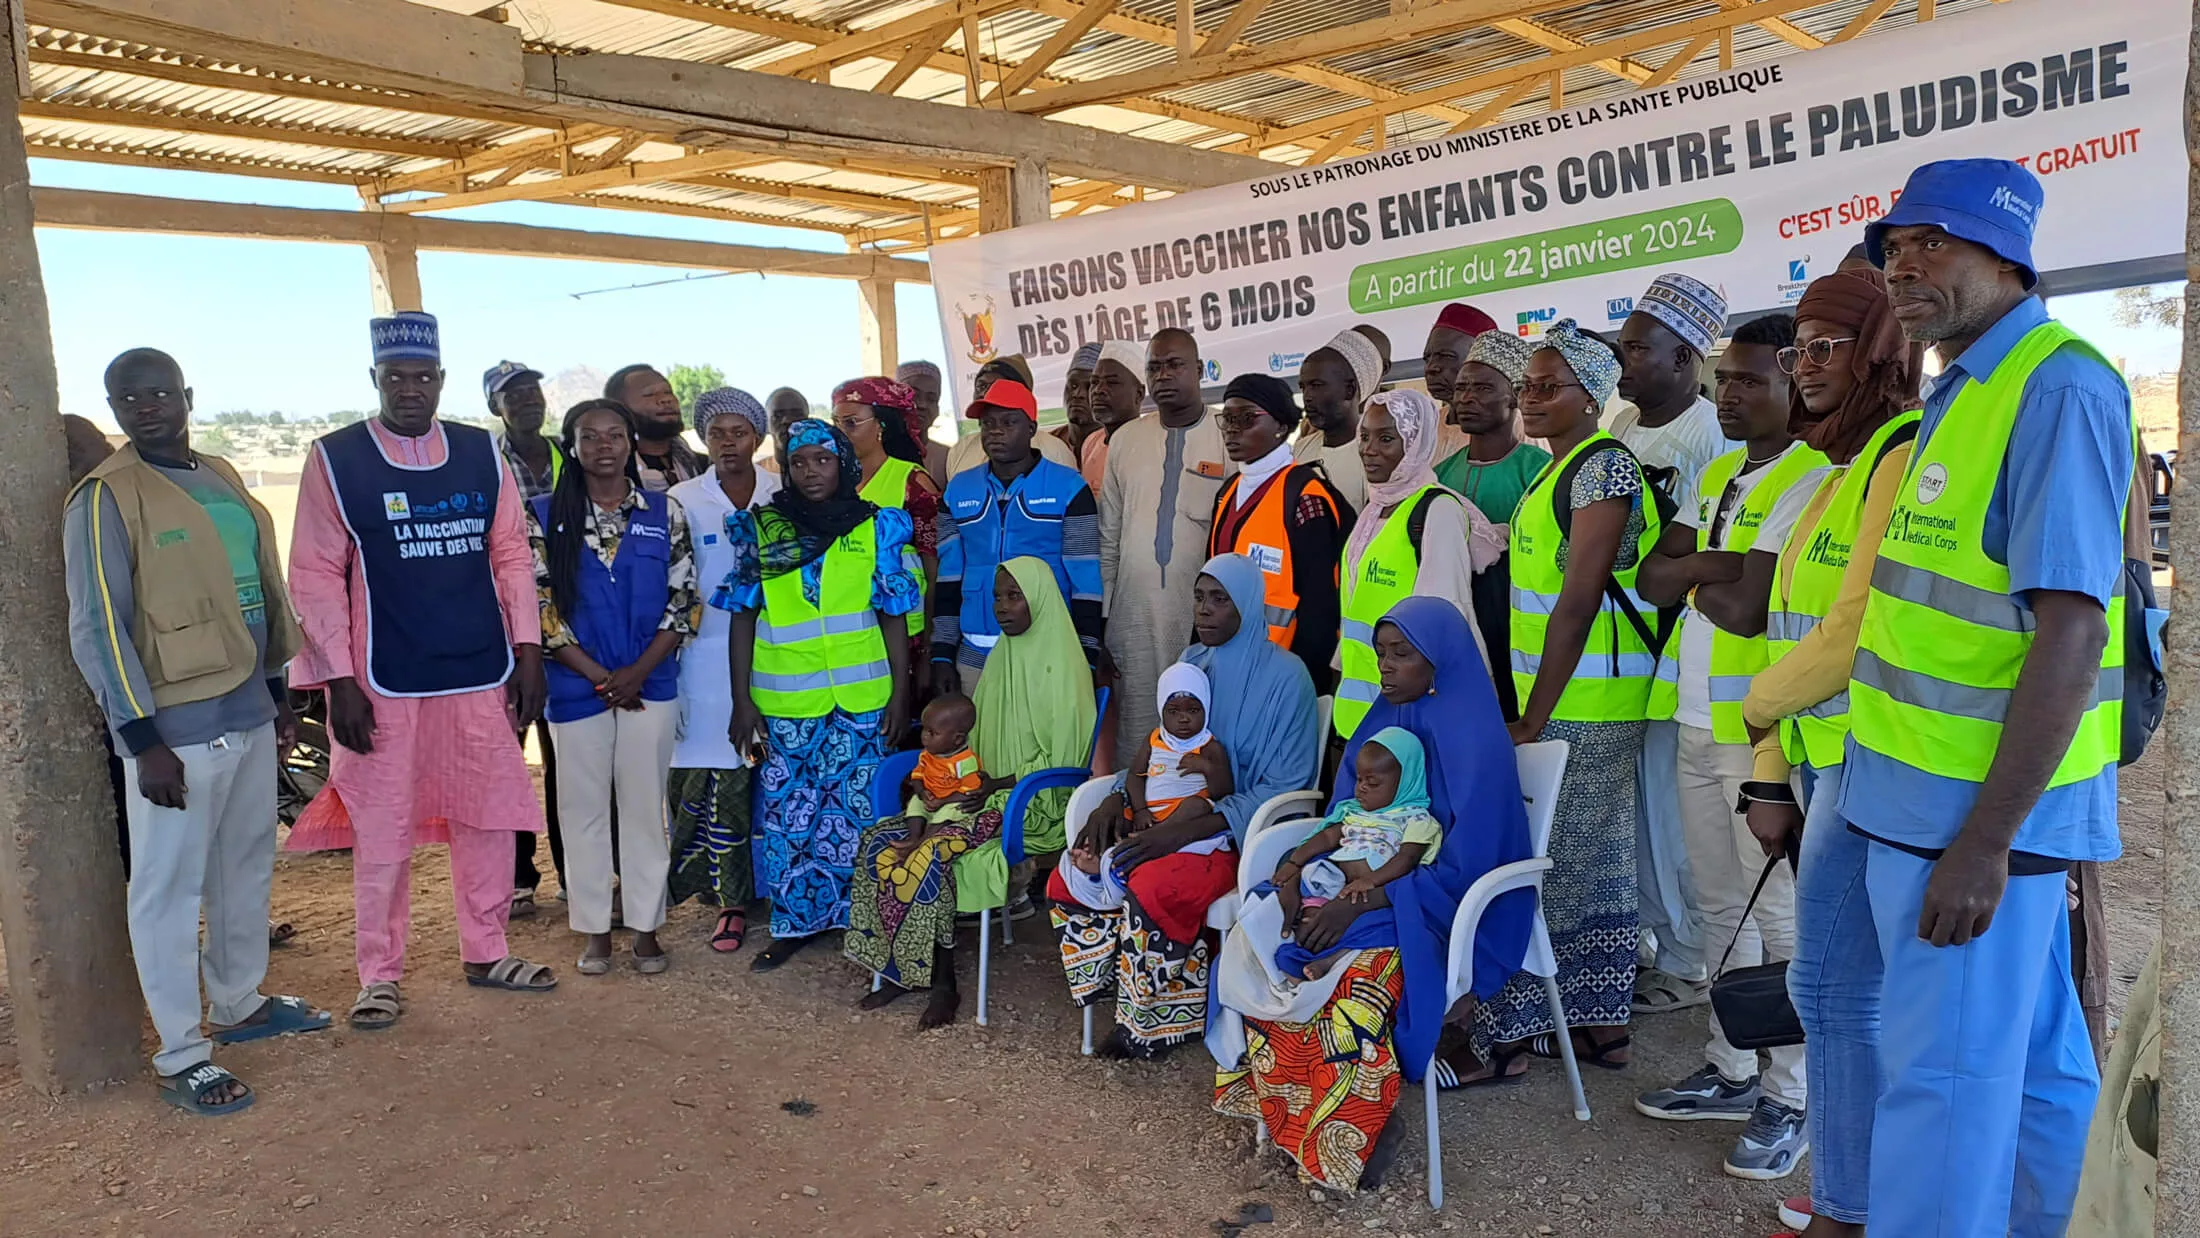 International Medical Corps staff and families from the community gather at the launch of Cameroon’s first malaria vaccine campaign.